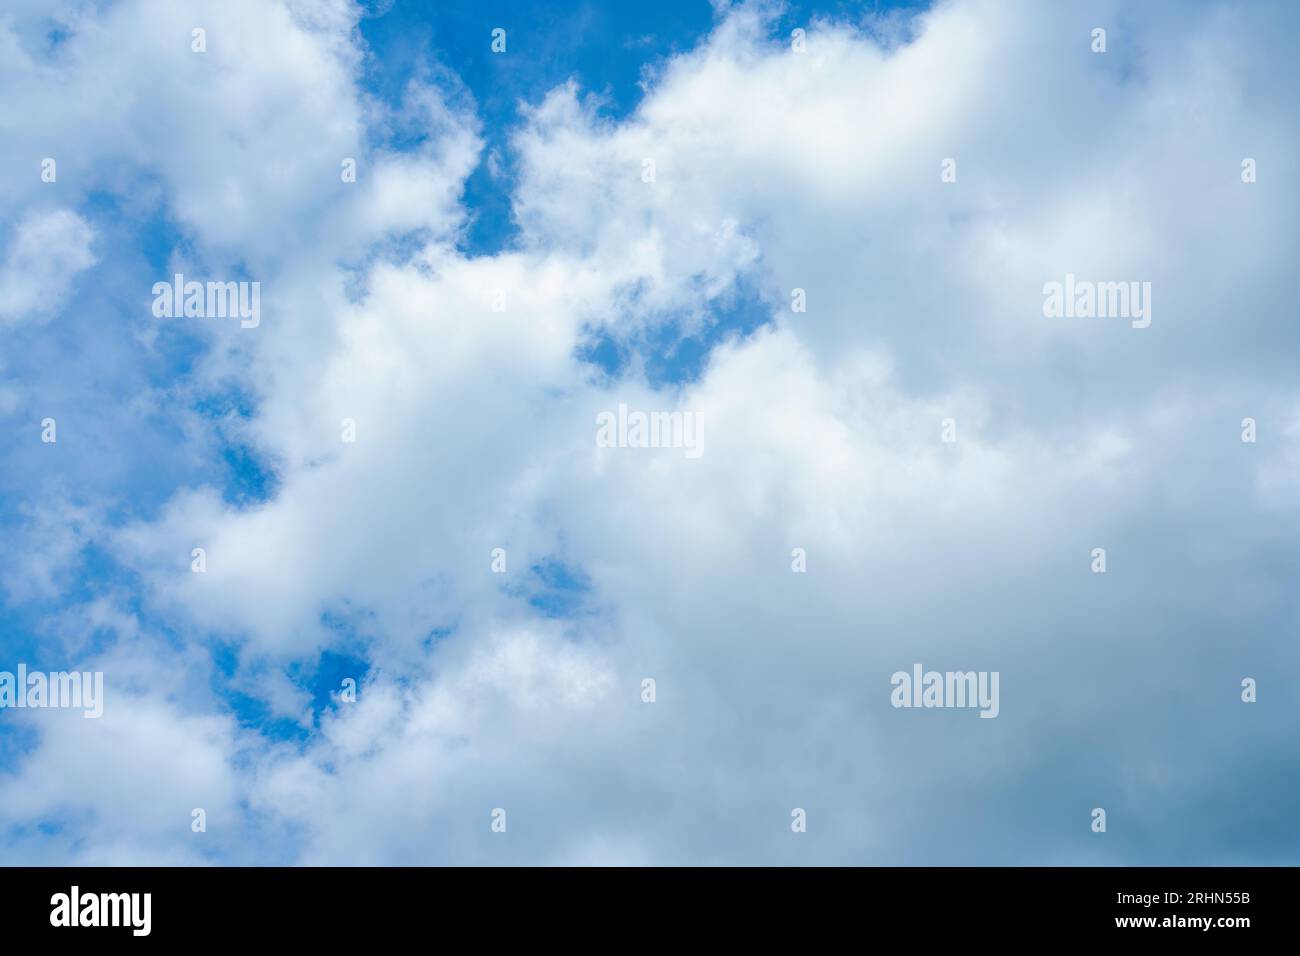 Fluffy white cloud forming condensation on blue sky in sunny day Stock Photo